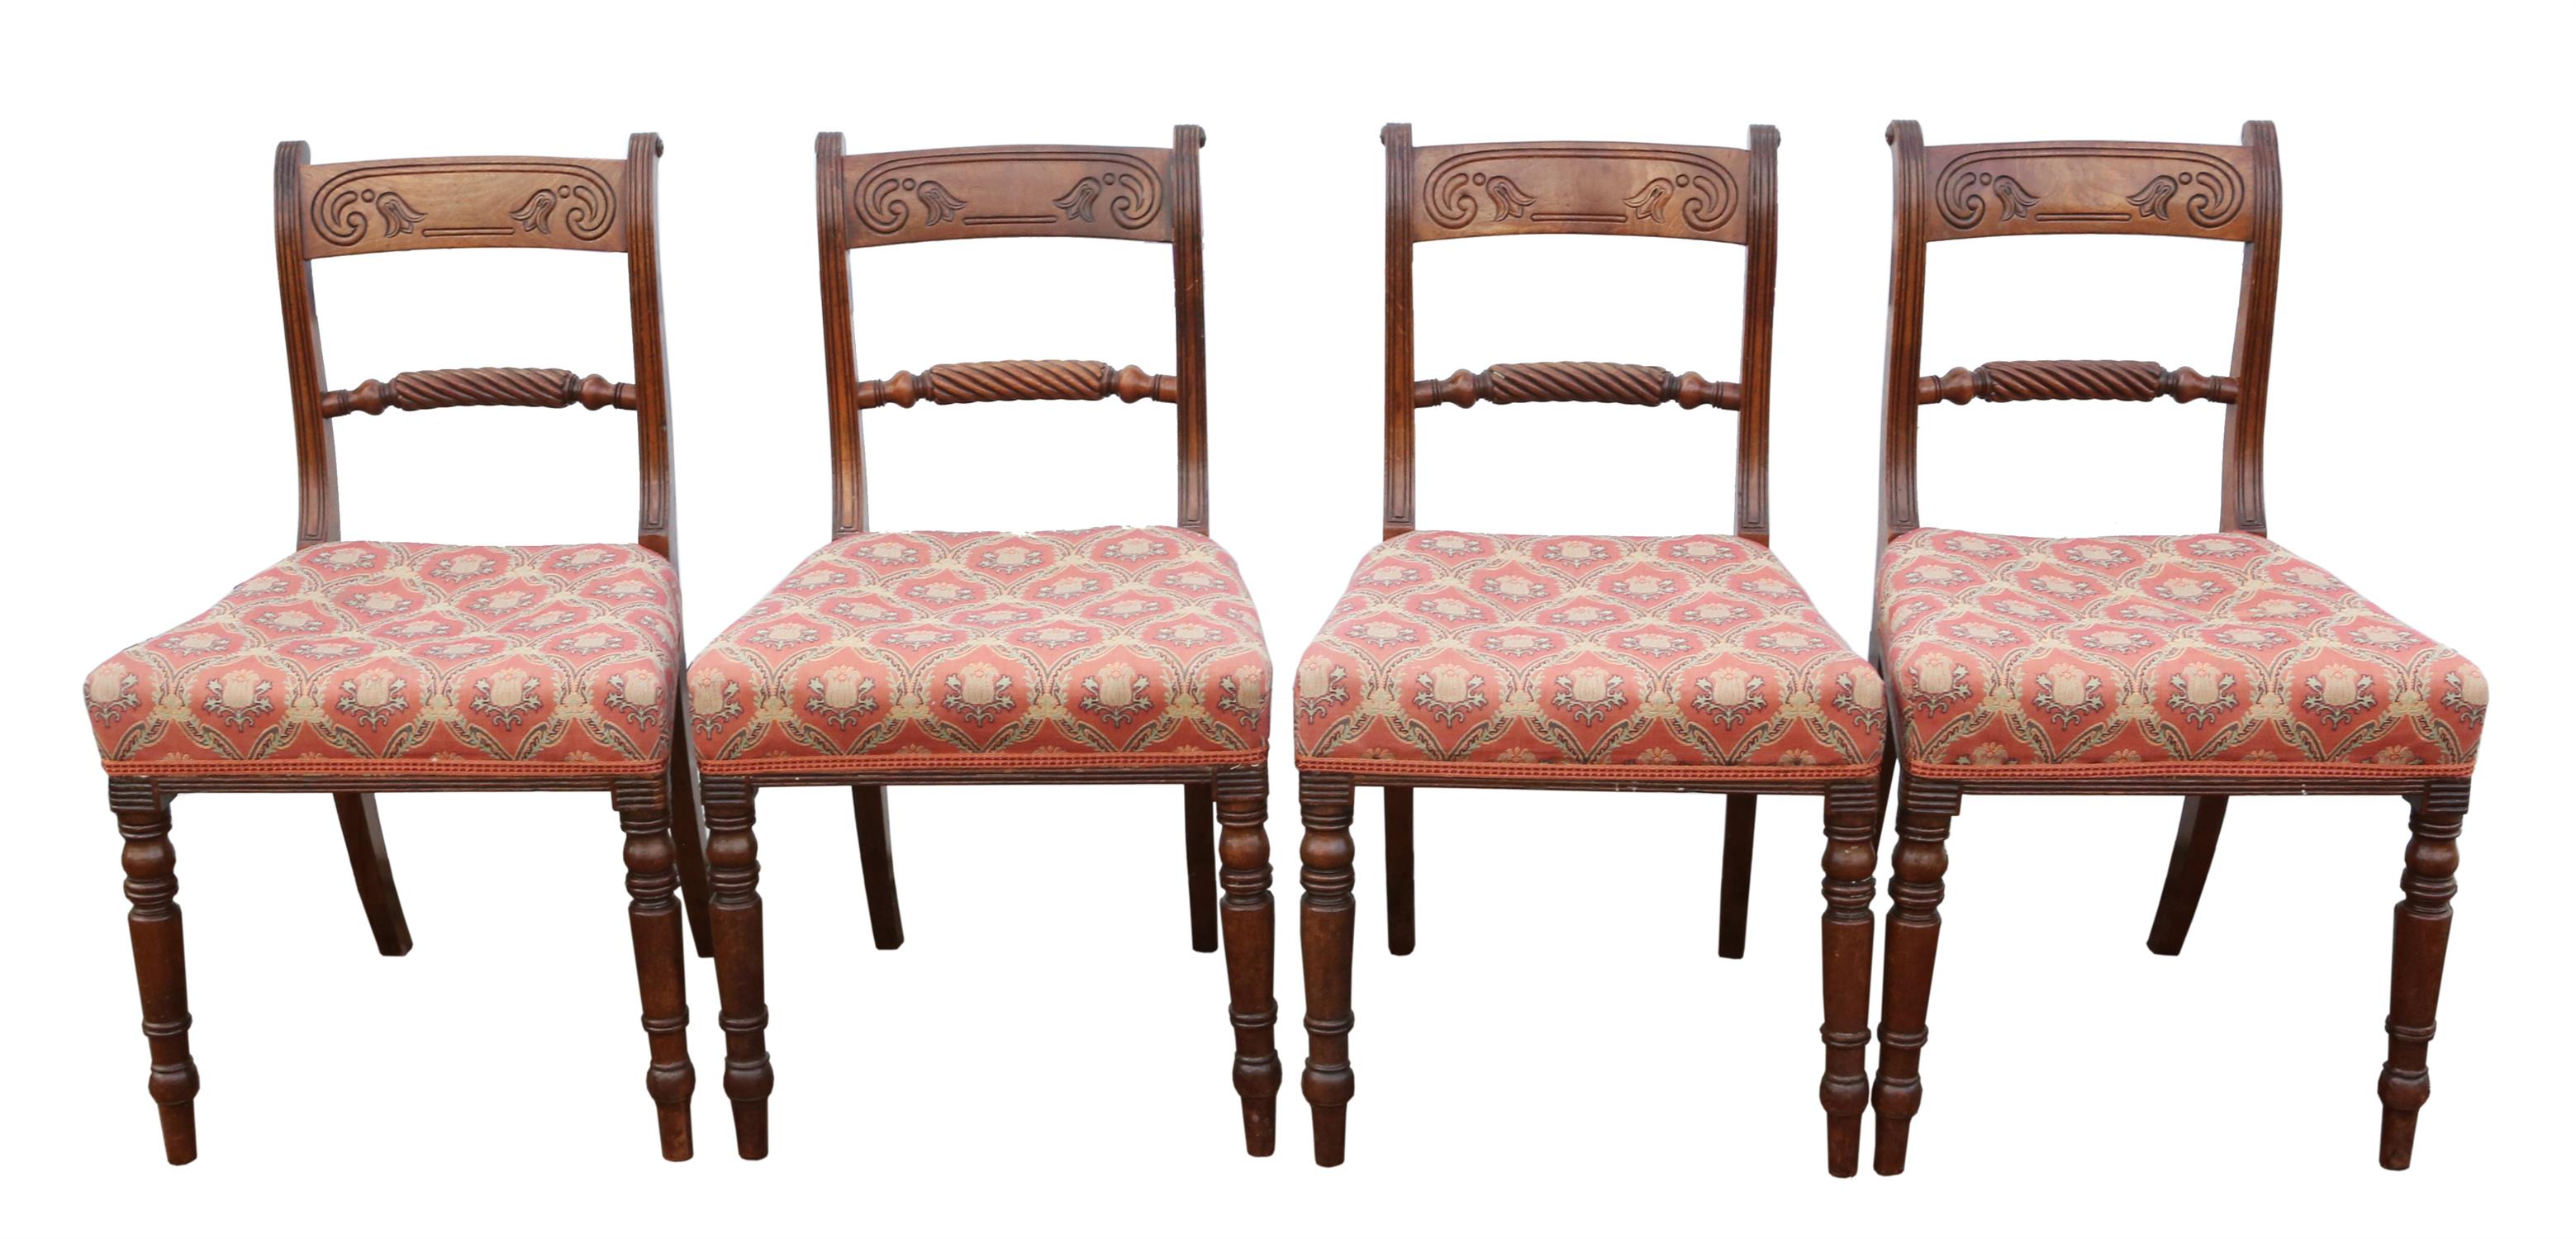 A set of George IV mahogany dining chairs, with rope twist mid bars and turned legs. (4)